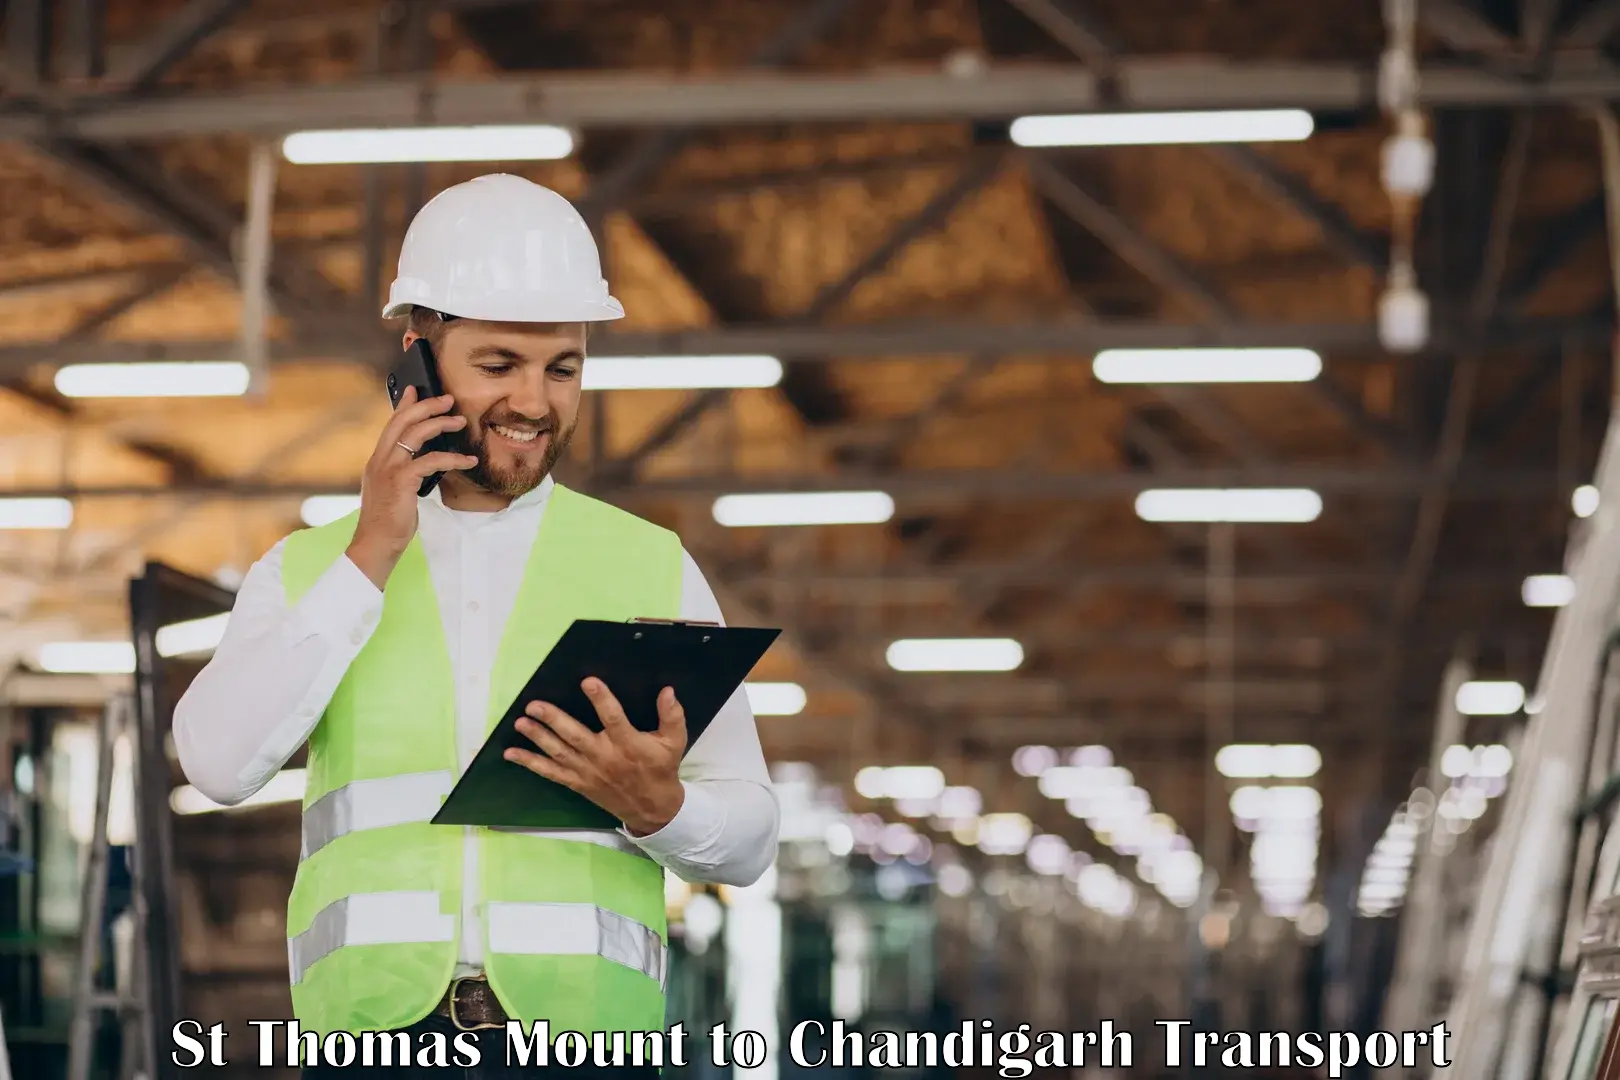 Shipping services St Thomas Mount to Chandigarh